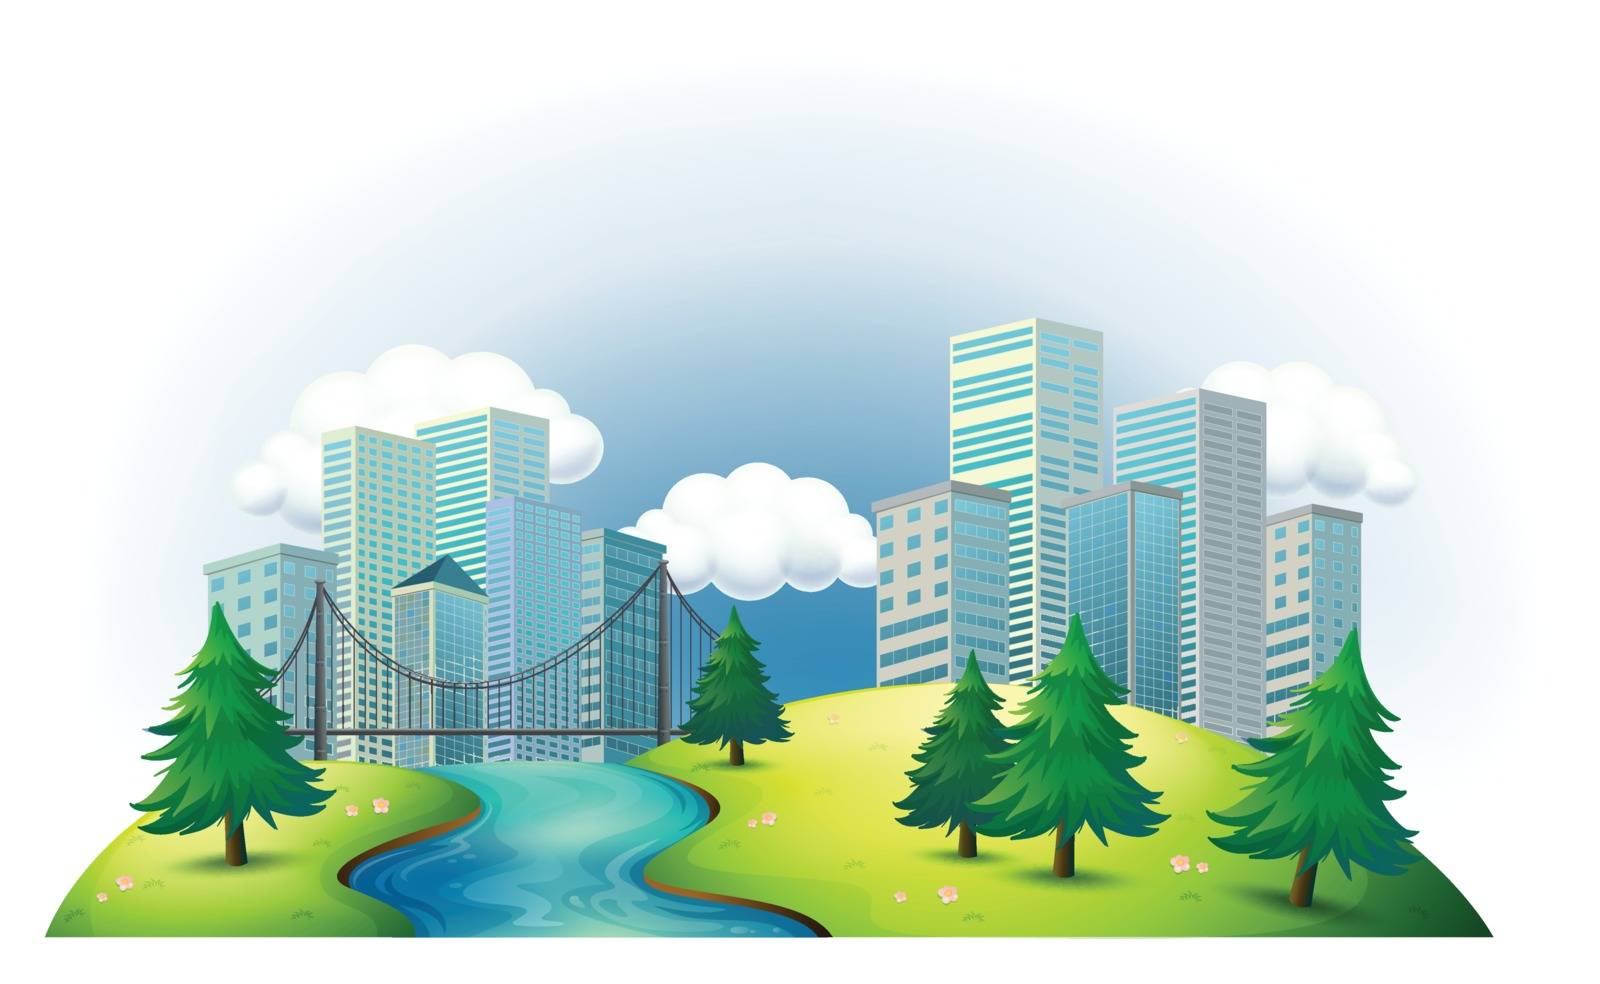 Illustration of the tall buildings in an island with a river and pine trees on a white background